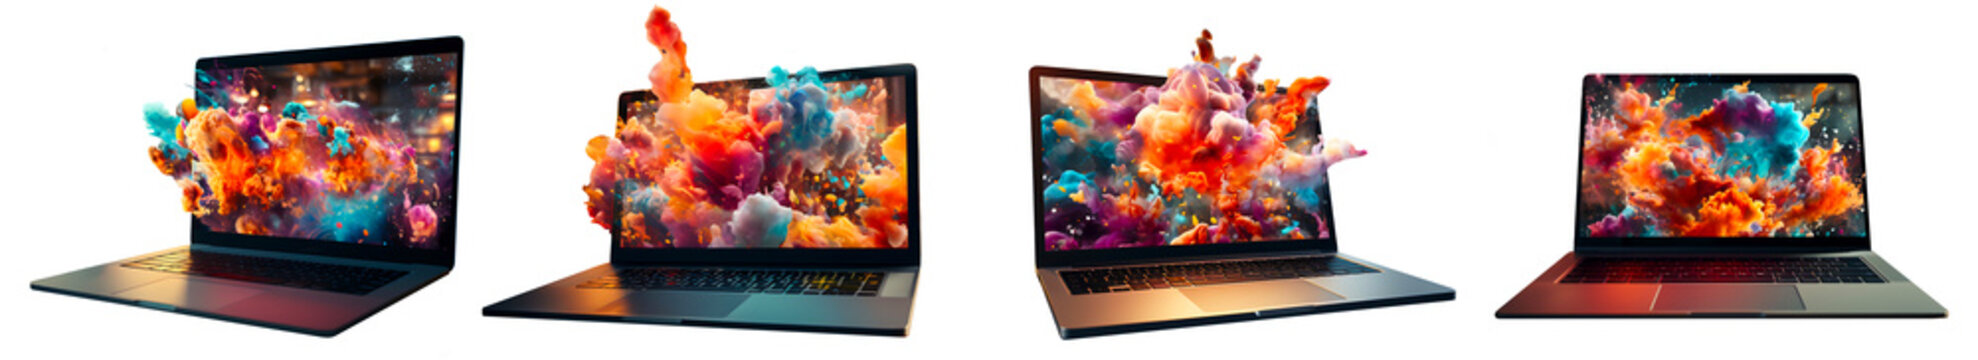 3D Colorful Cloud Explosion out of a Laptop, Digital Creativity Concept Render Isolated Template